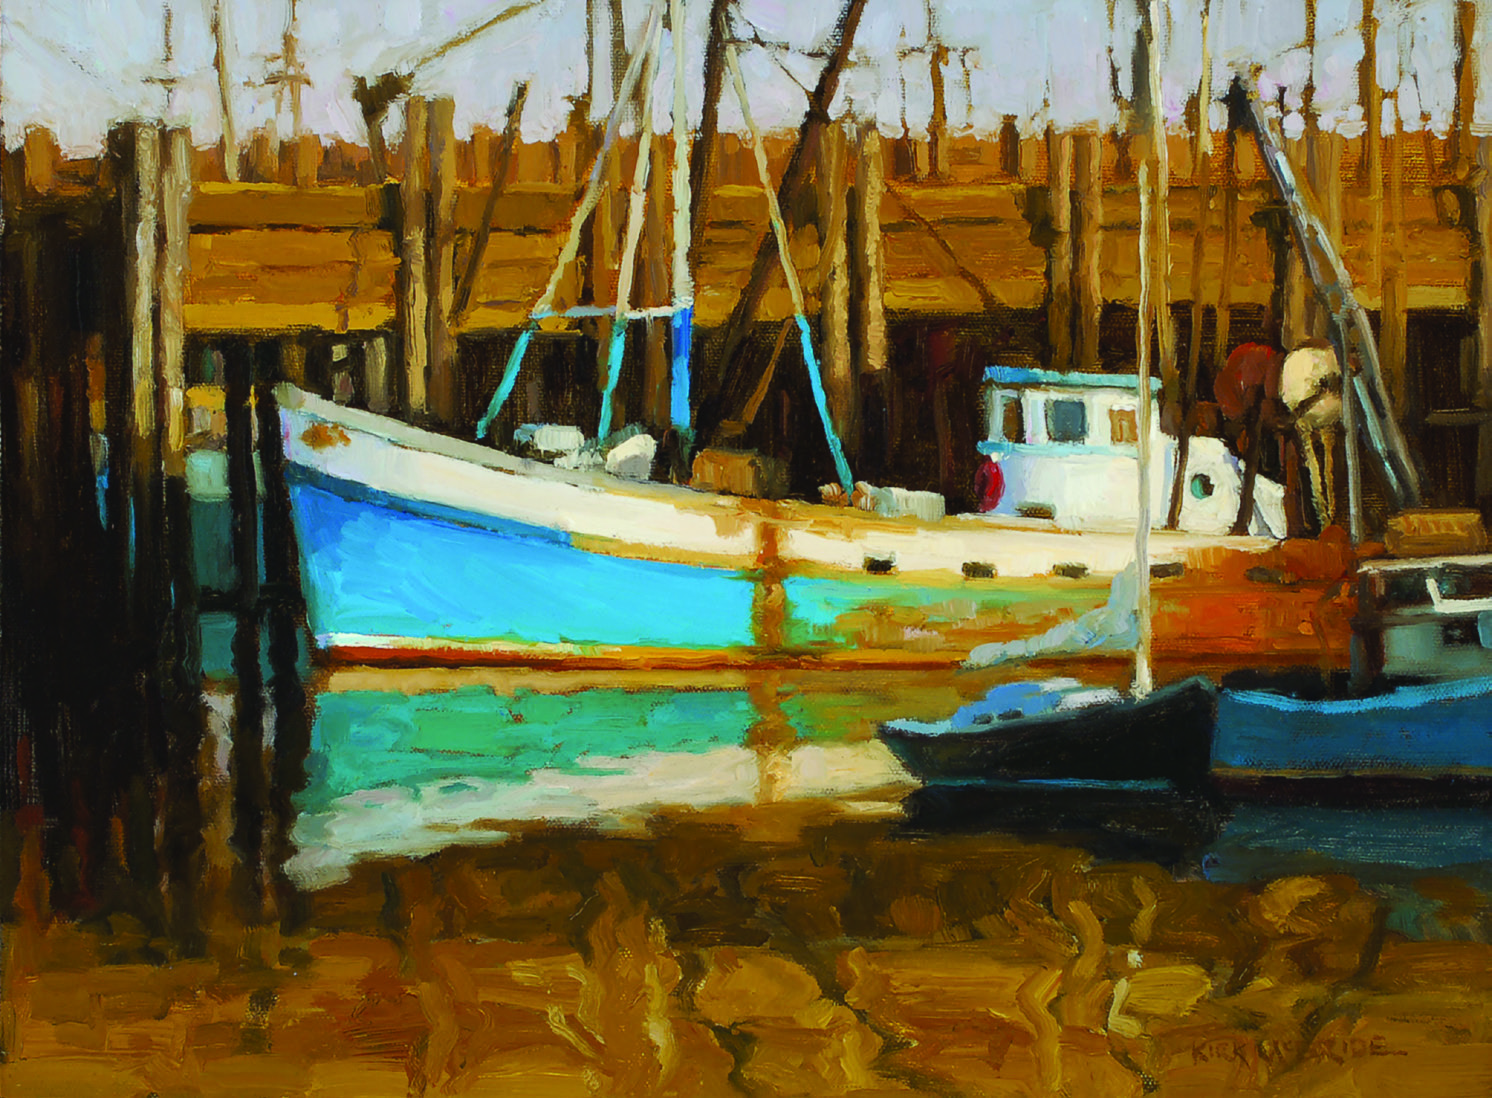 Kirk McBride, "Back at the Dock," 2014, oil painting